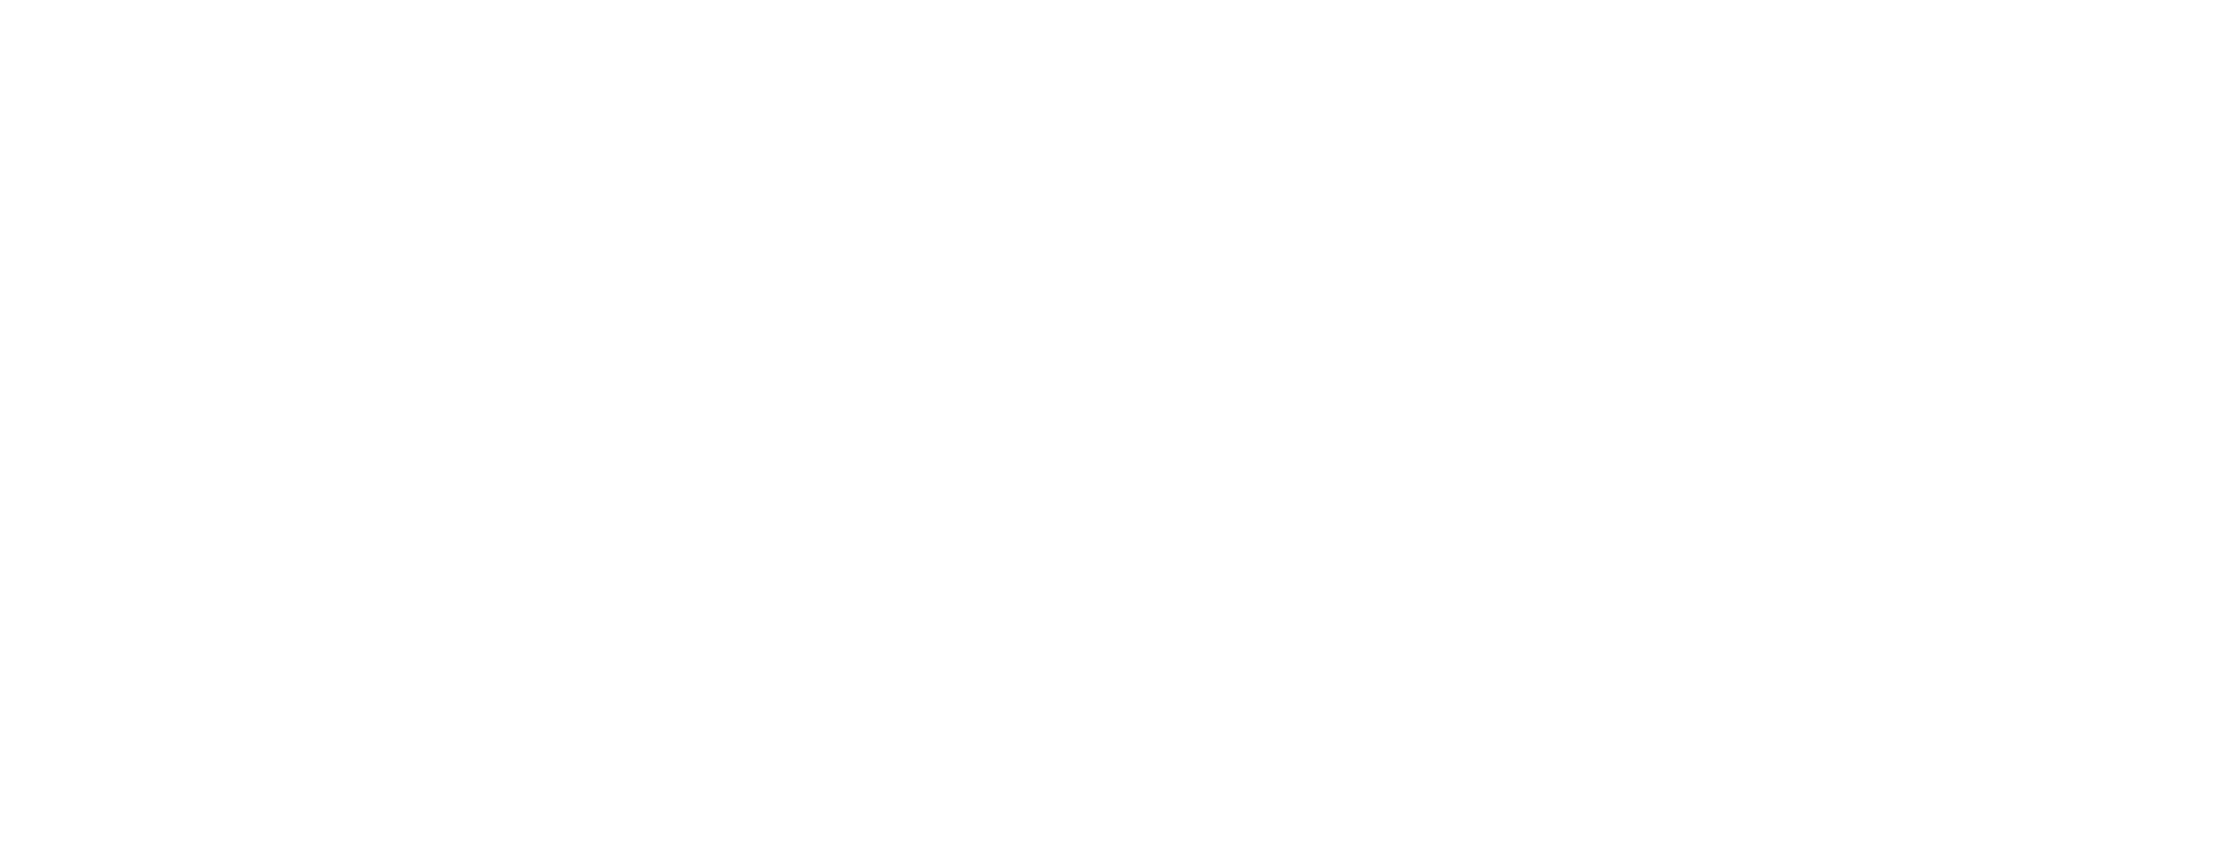 ALM Logo - ALM | What People Think